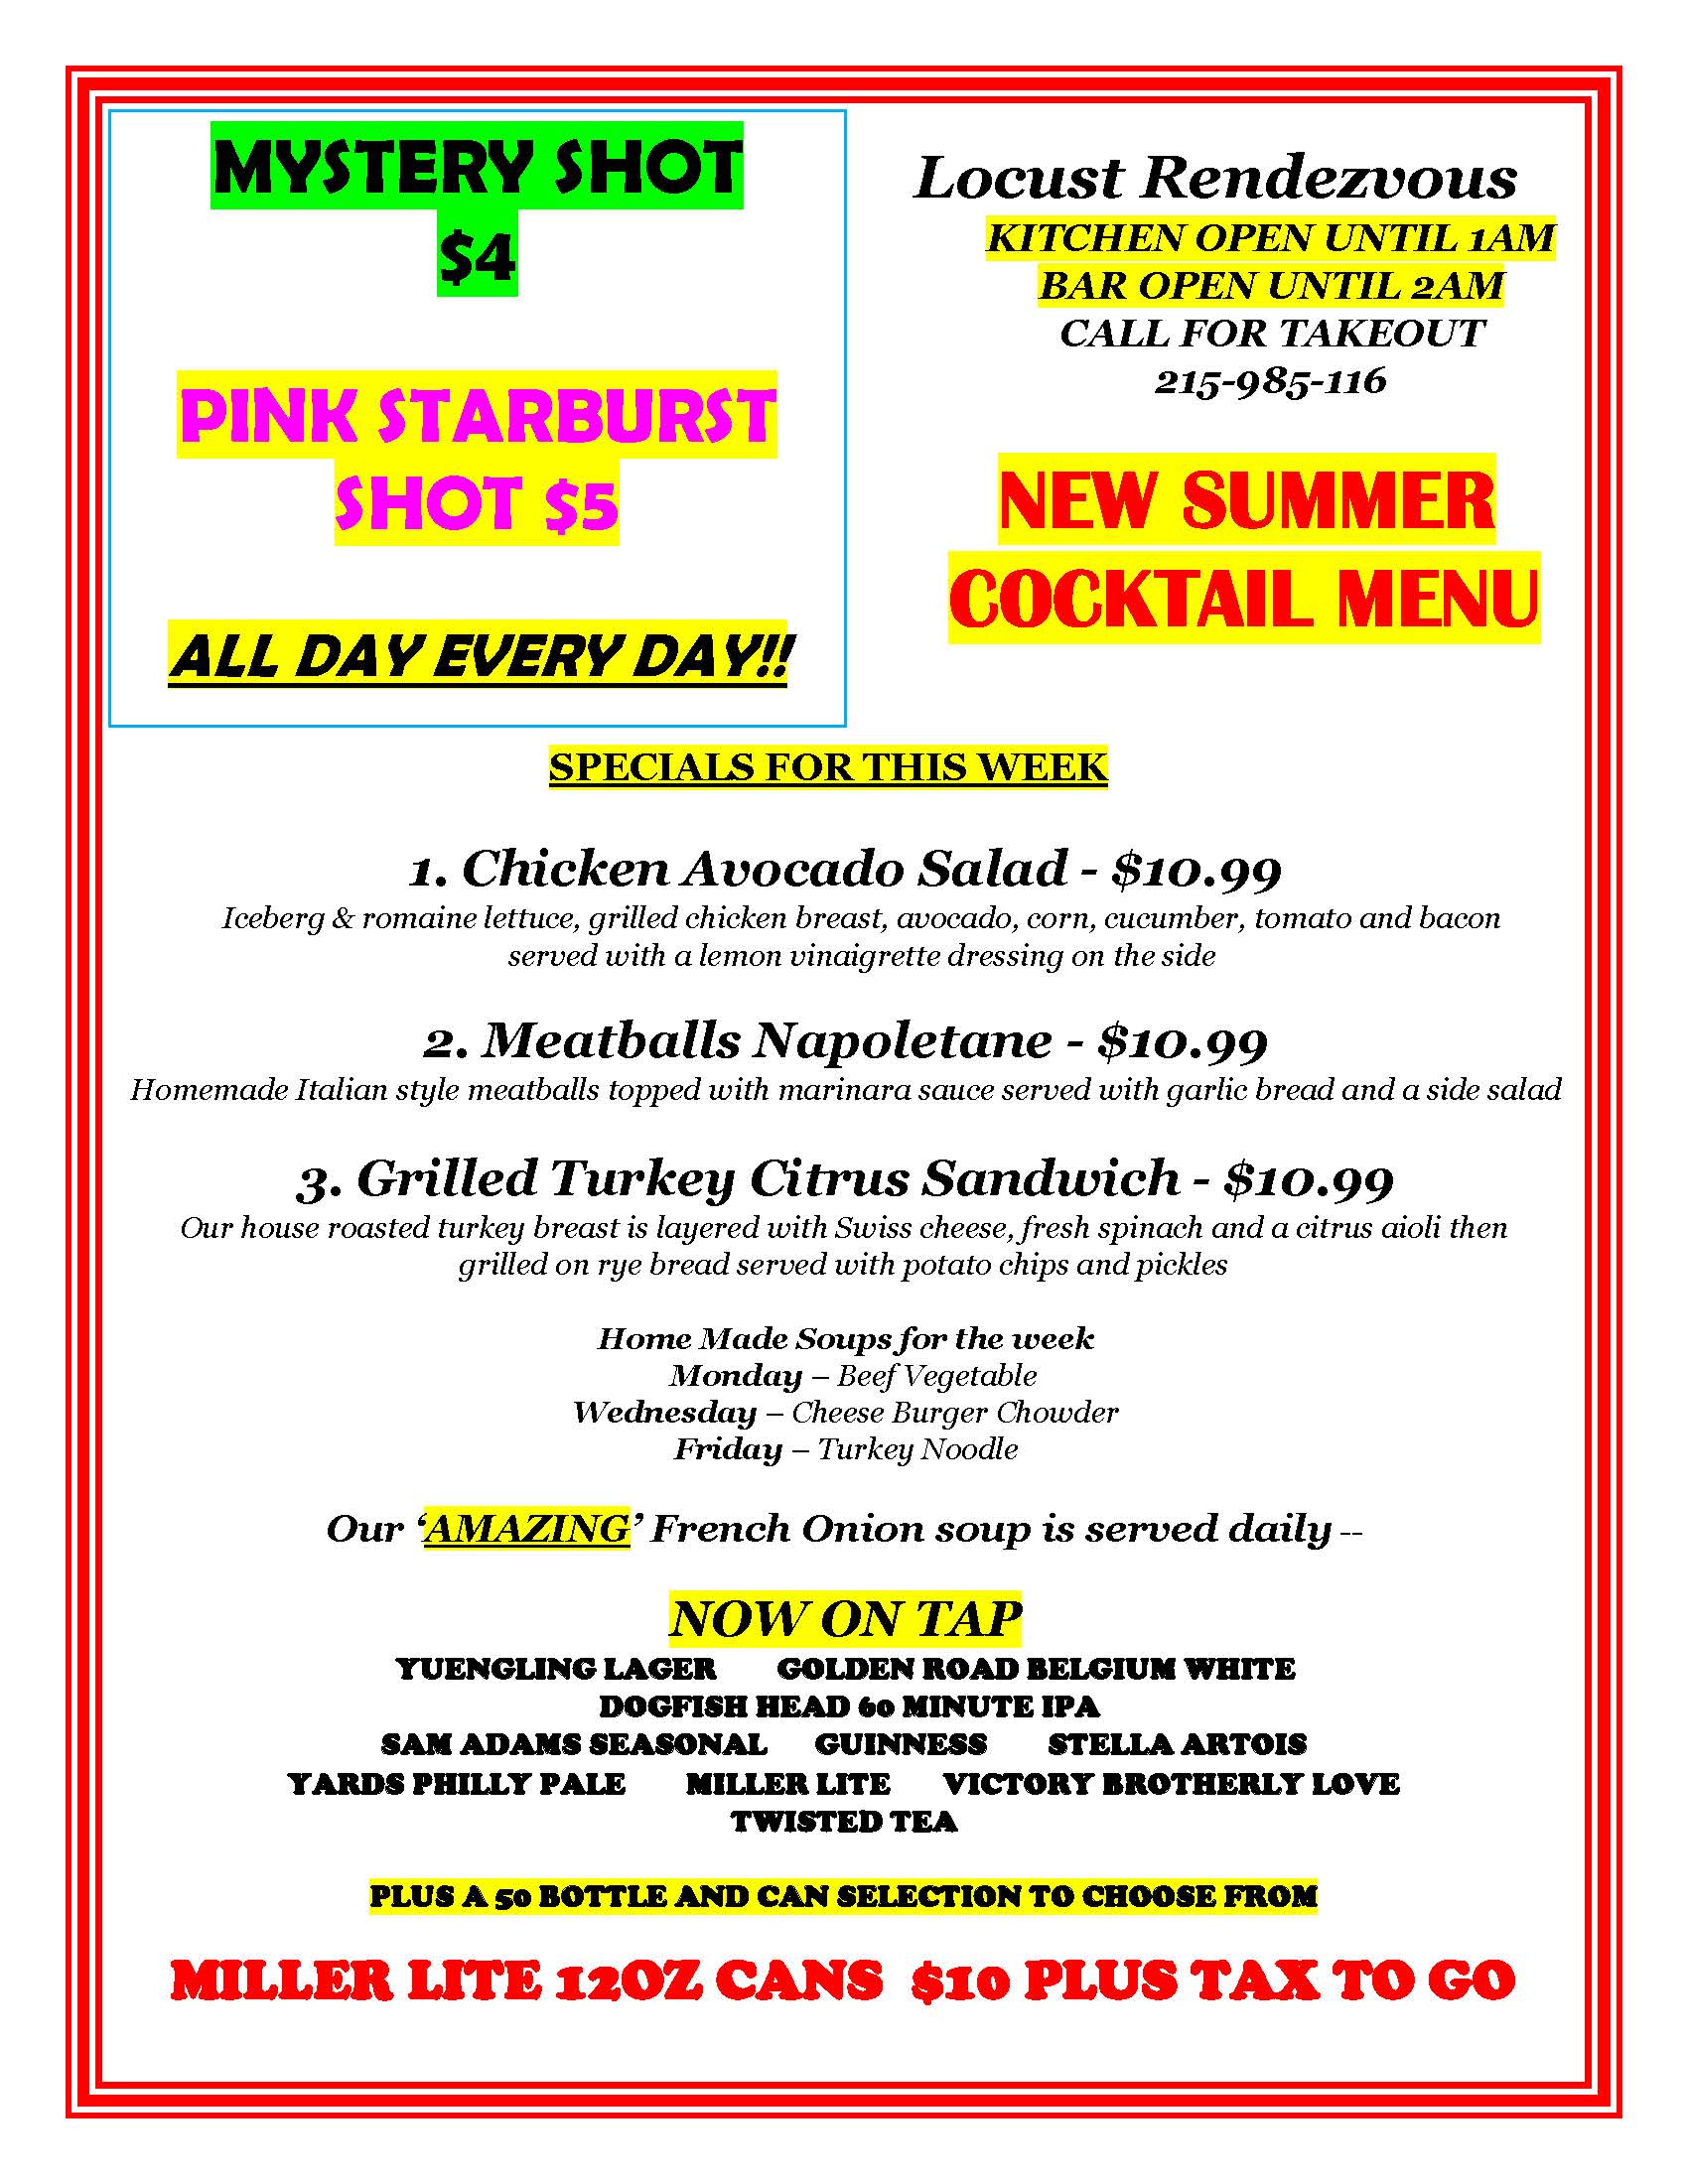 A colorful menu featuring various drink specials and food items such as salads, sandwiches, and pasta. The menu highlights Mystery Shot, Pink Starburst Shot, and new summer cocktail options.